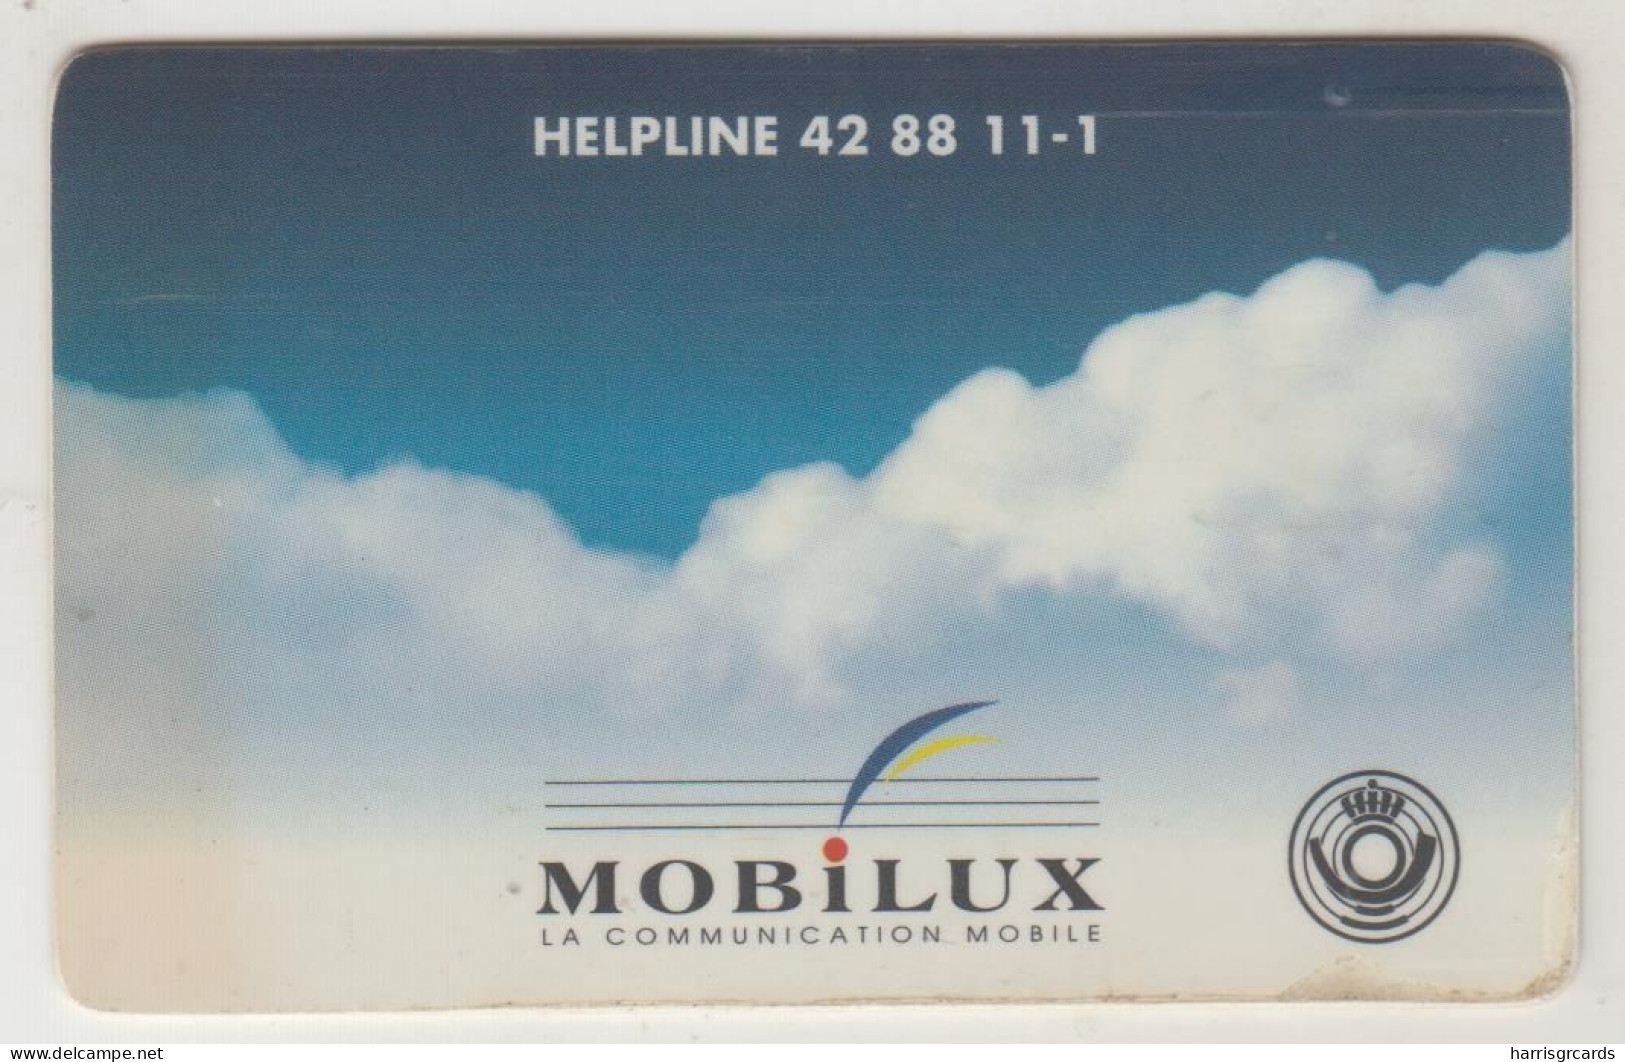 LUXEMBOURG - LUX GSM - Reverse "Mobilux Helpline 42 88 1-1" GSM Card, Used - Lussemburgo